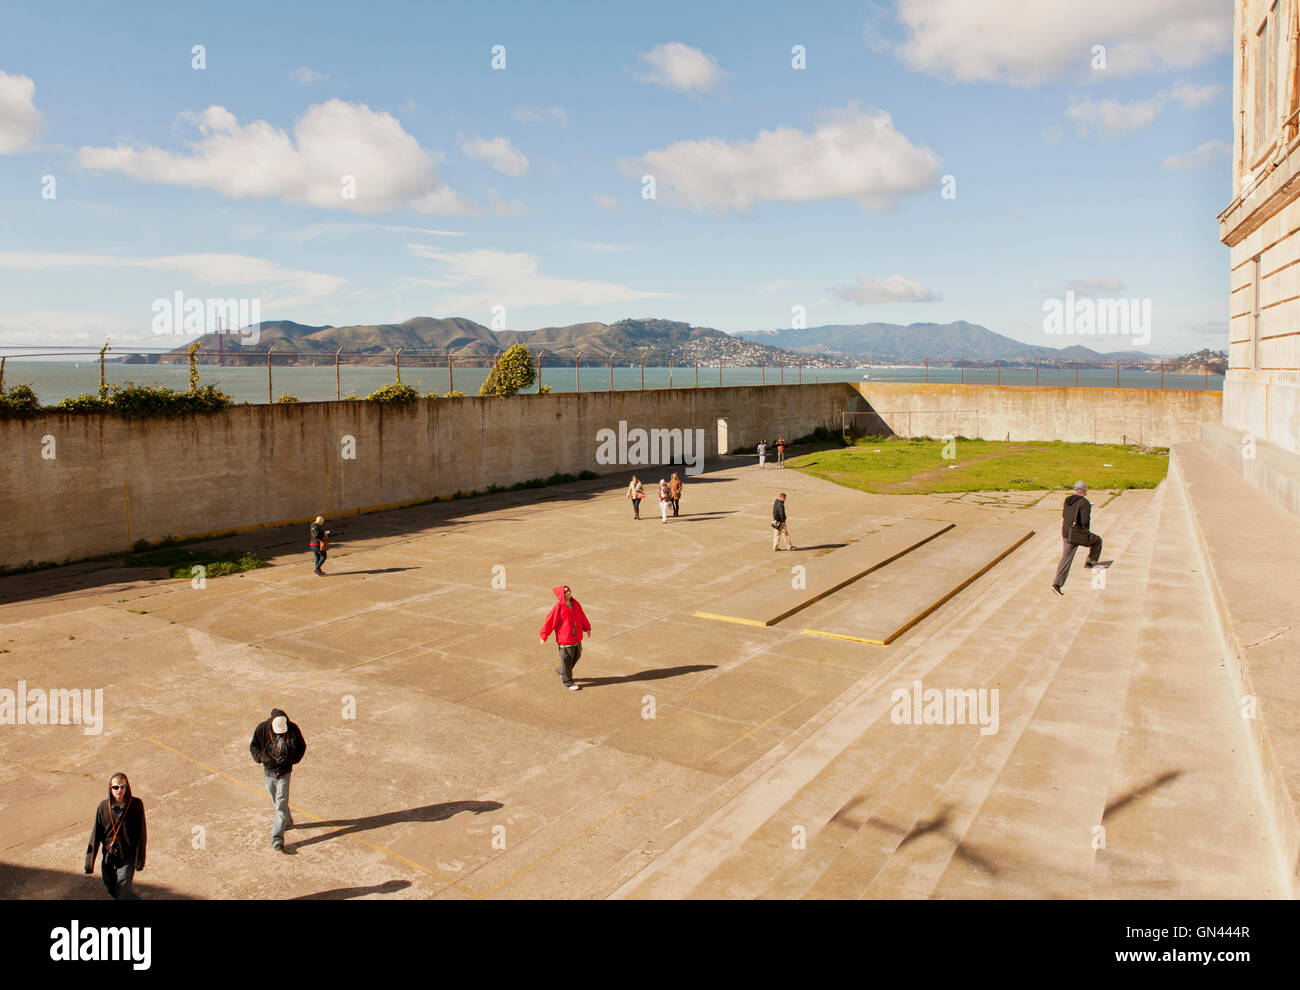 The Recreation Yard was the yard used by inmates of Alcatraz Federal Penitentiary between 1934 and 1963. San Francisco, CA Stock Photo